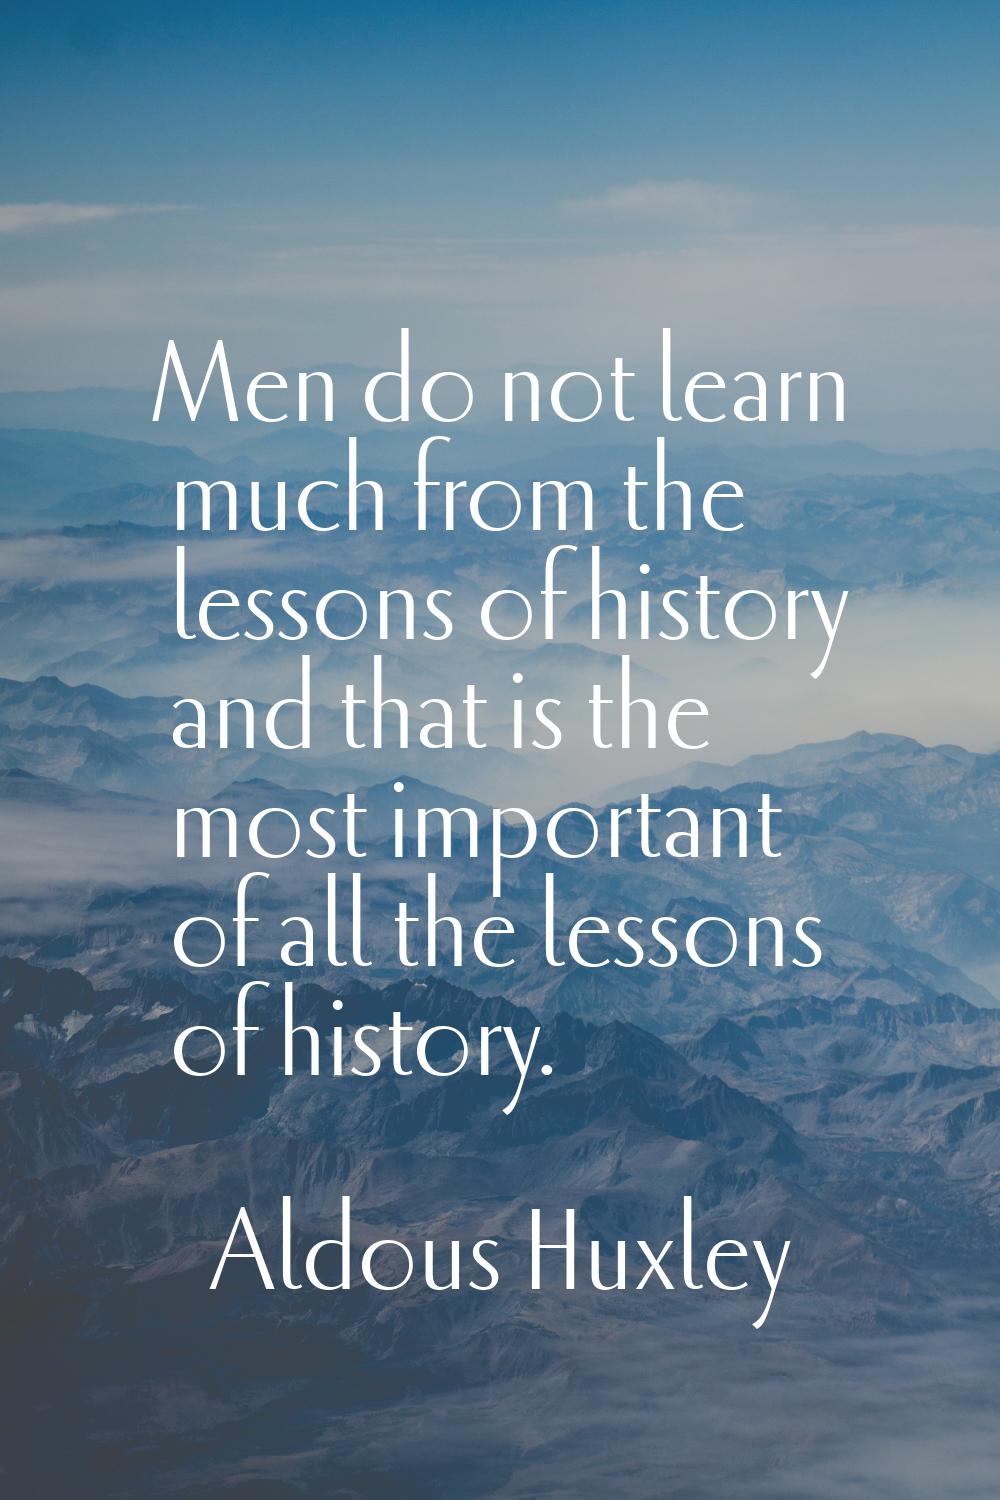 Men do not learn much from the lessons of history and that is the most important of all the lessons